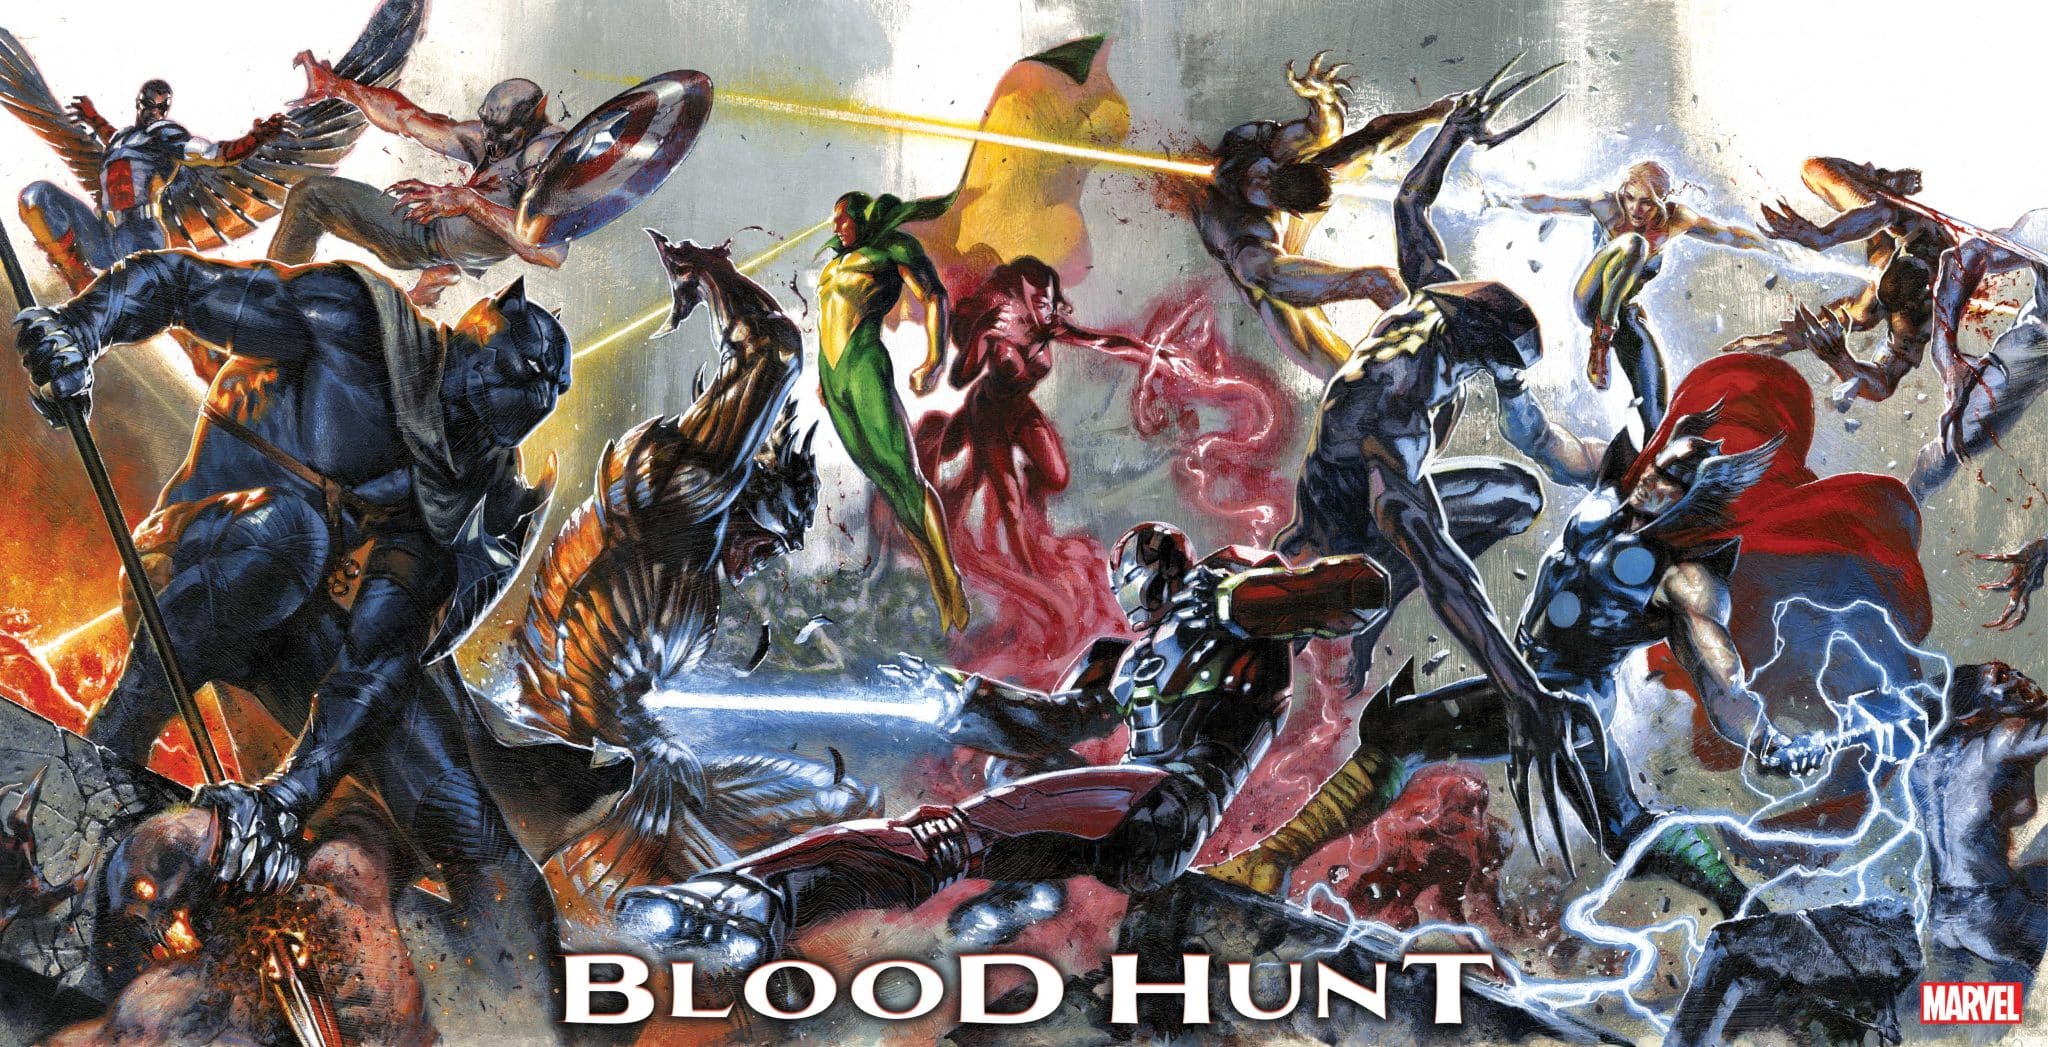 The Vampire Reign Continues as New ‘Blood Hunt’ Tie-Ins and Covers Revealed for Marvel’s Summer Event